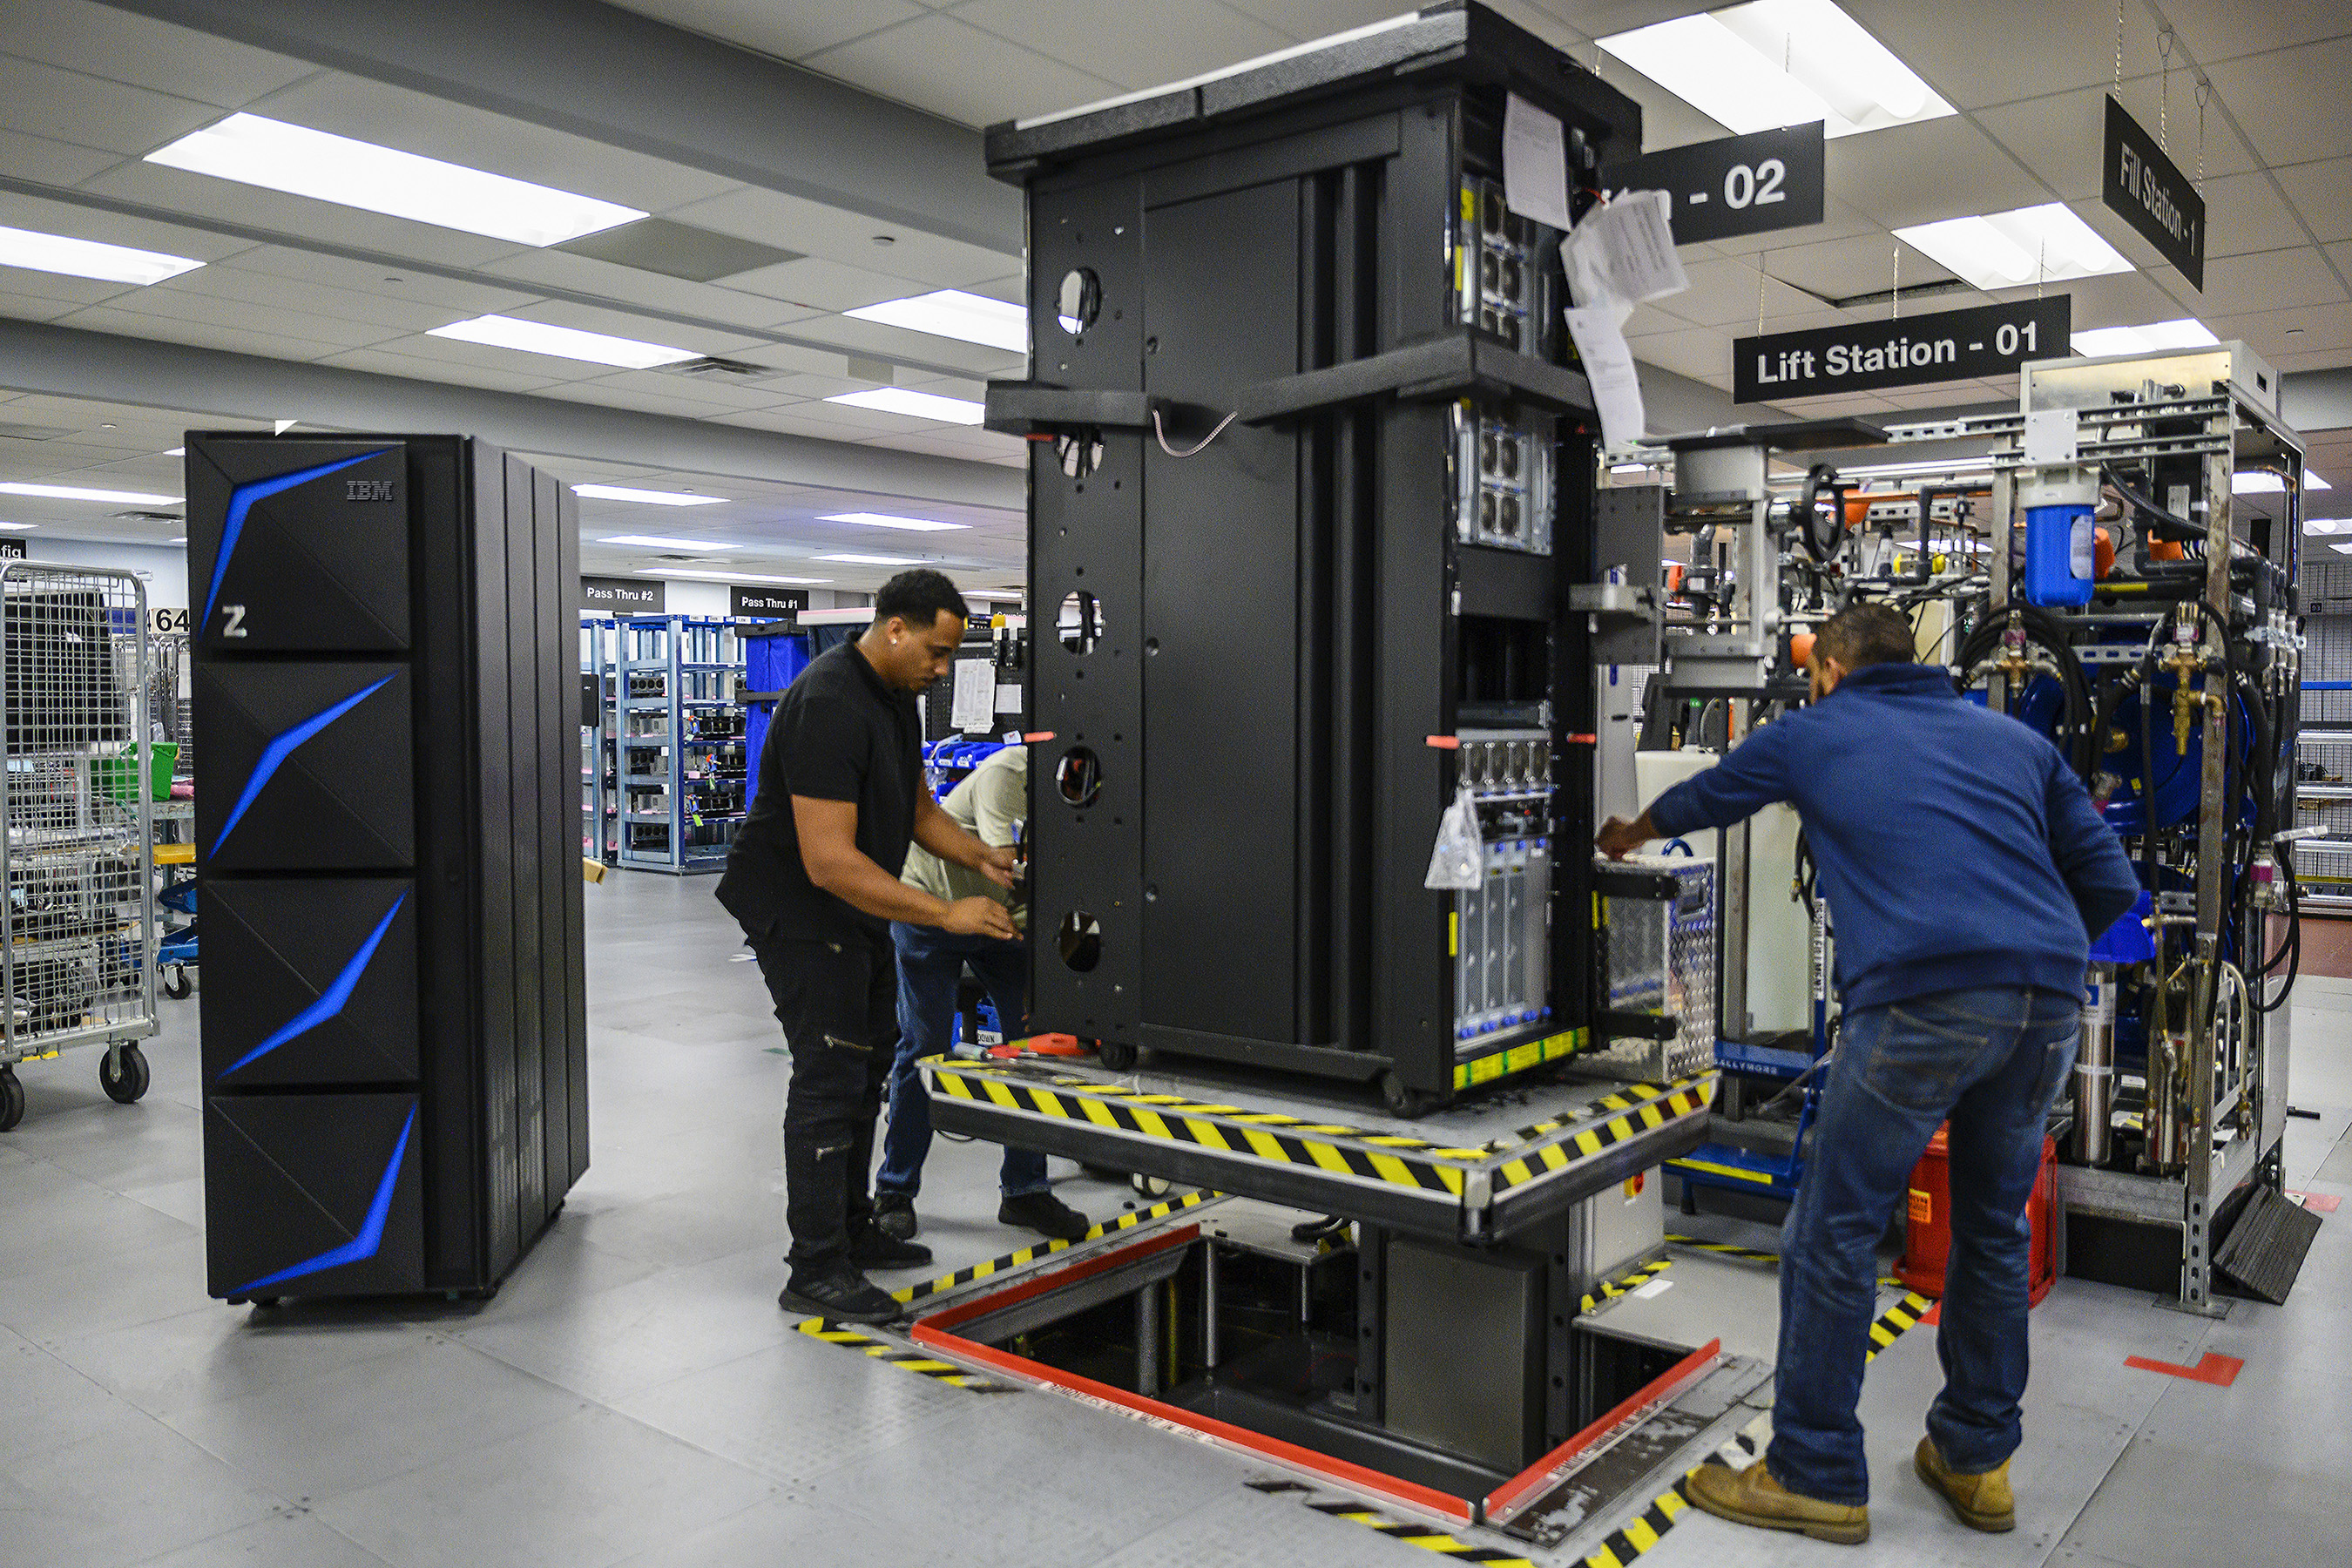 IBM engineers assembling the IBM z15, a new enterprise platform delivering the ability to manage the privacy of customer data. The systems features an industry-first capability to instantly revoke access to data across the hybrid cloud. The IBM z15 system culminates four years of development with over 3,000 IBM Z patents issued or in process and represents a collaboration with input from over 100 companies. IBM z15 can process up to 1 trillion web transactions a day and features new cloud-native development tools and instant recovery technology to optimize resiliency.